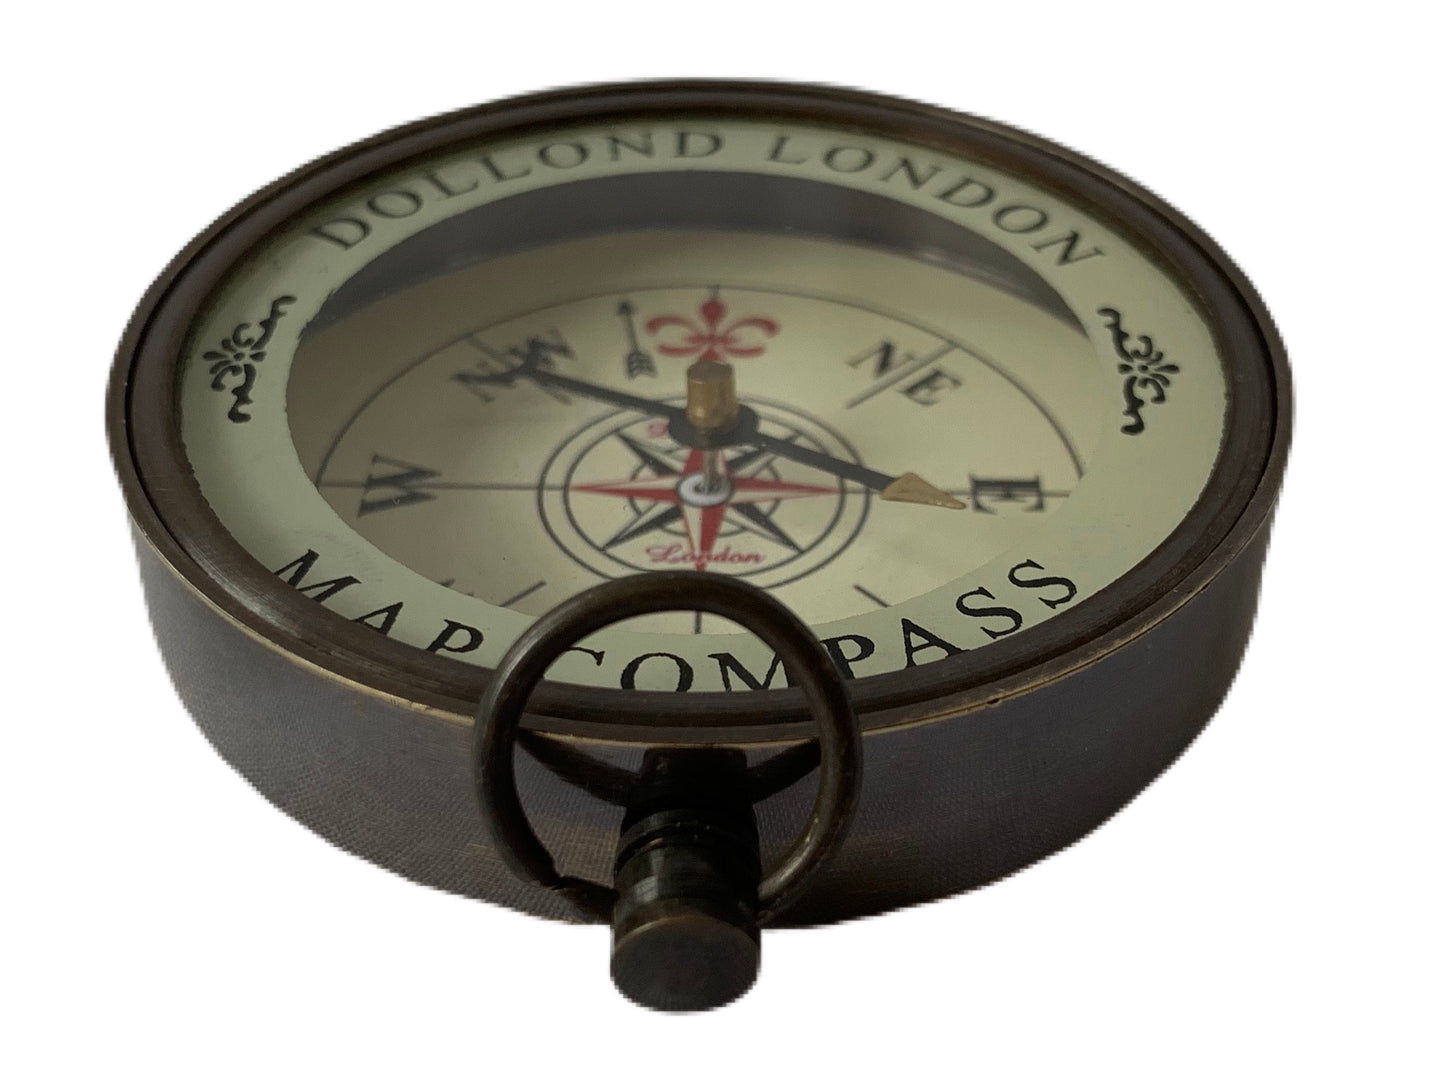 Dollond London Map Compass